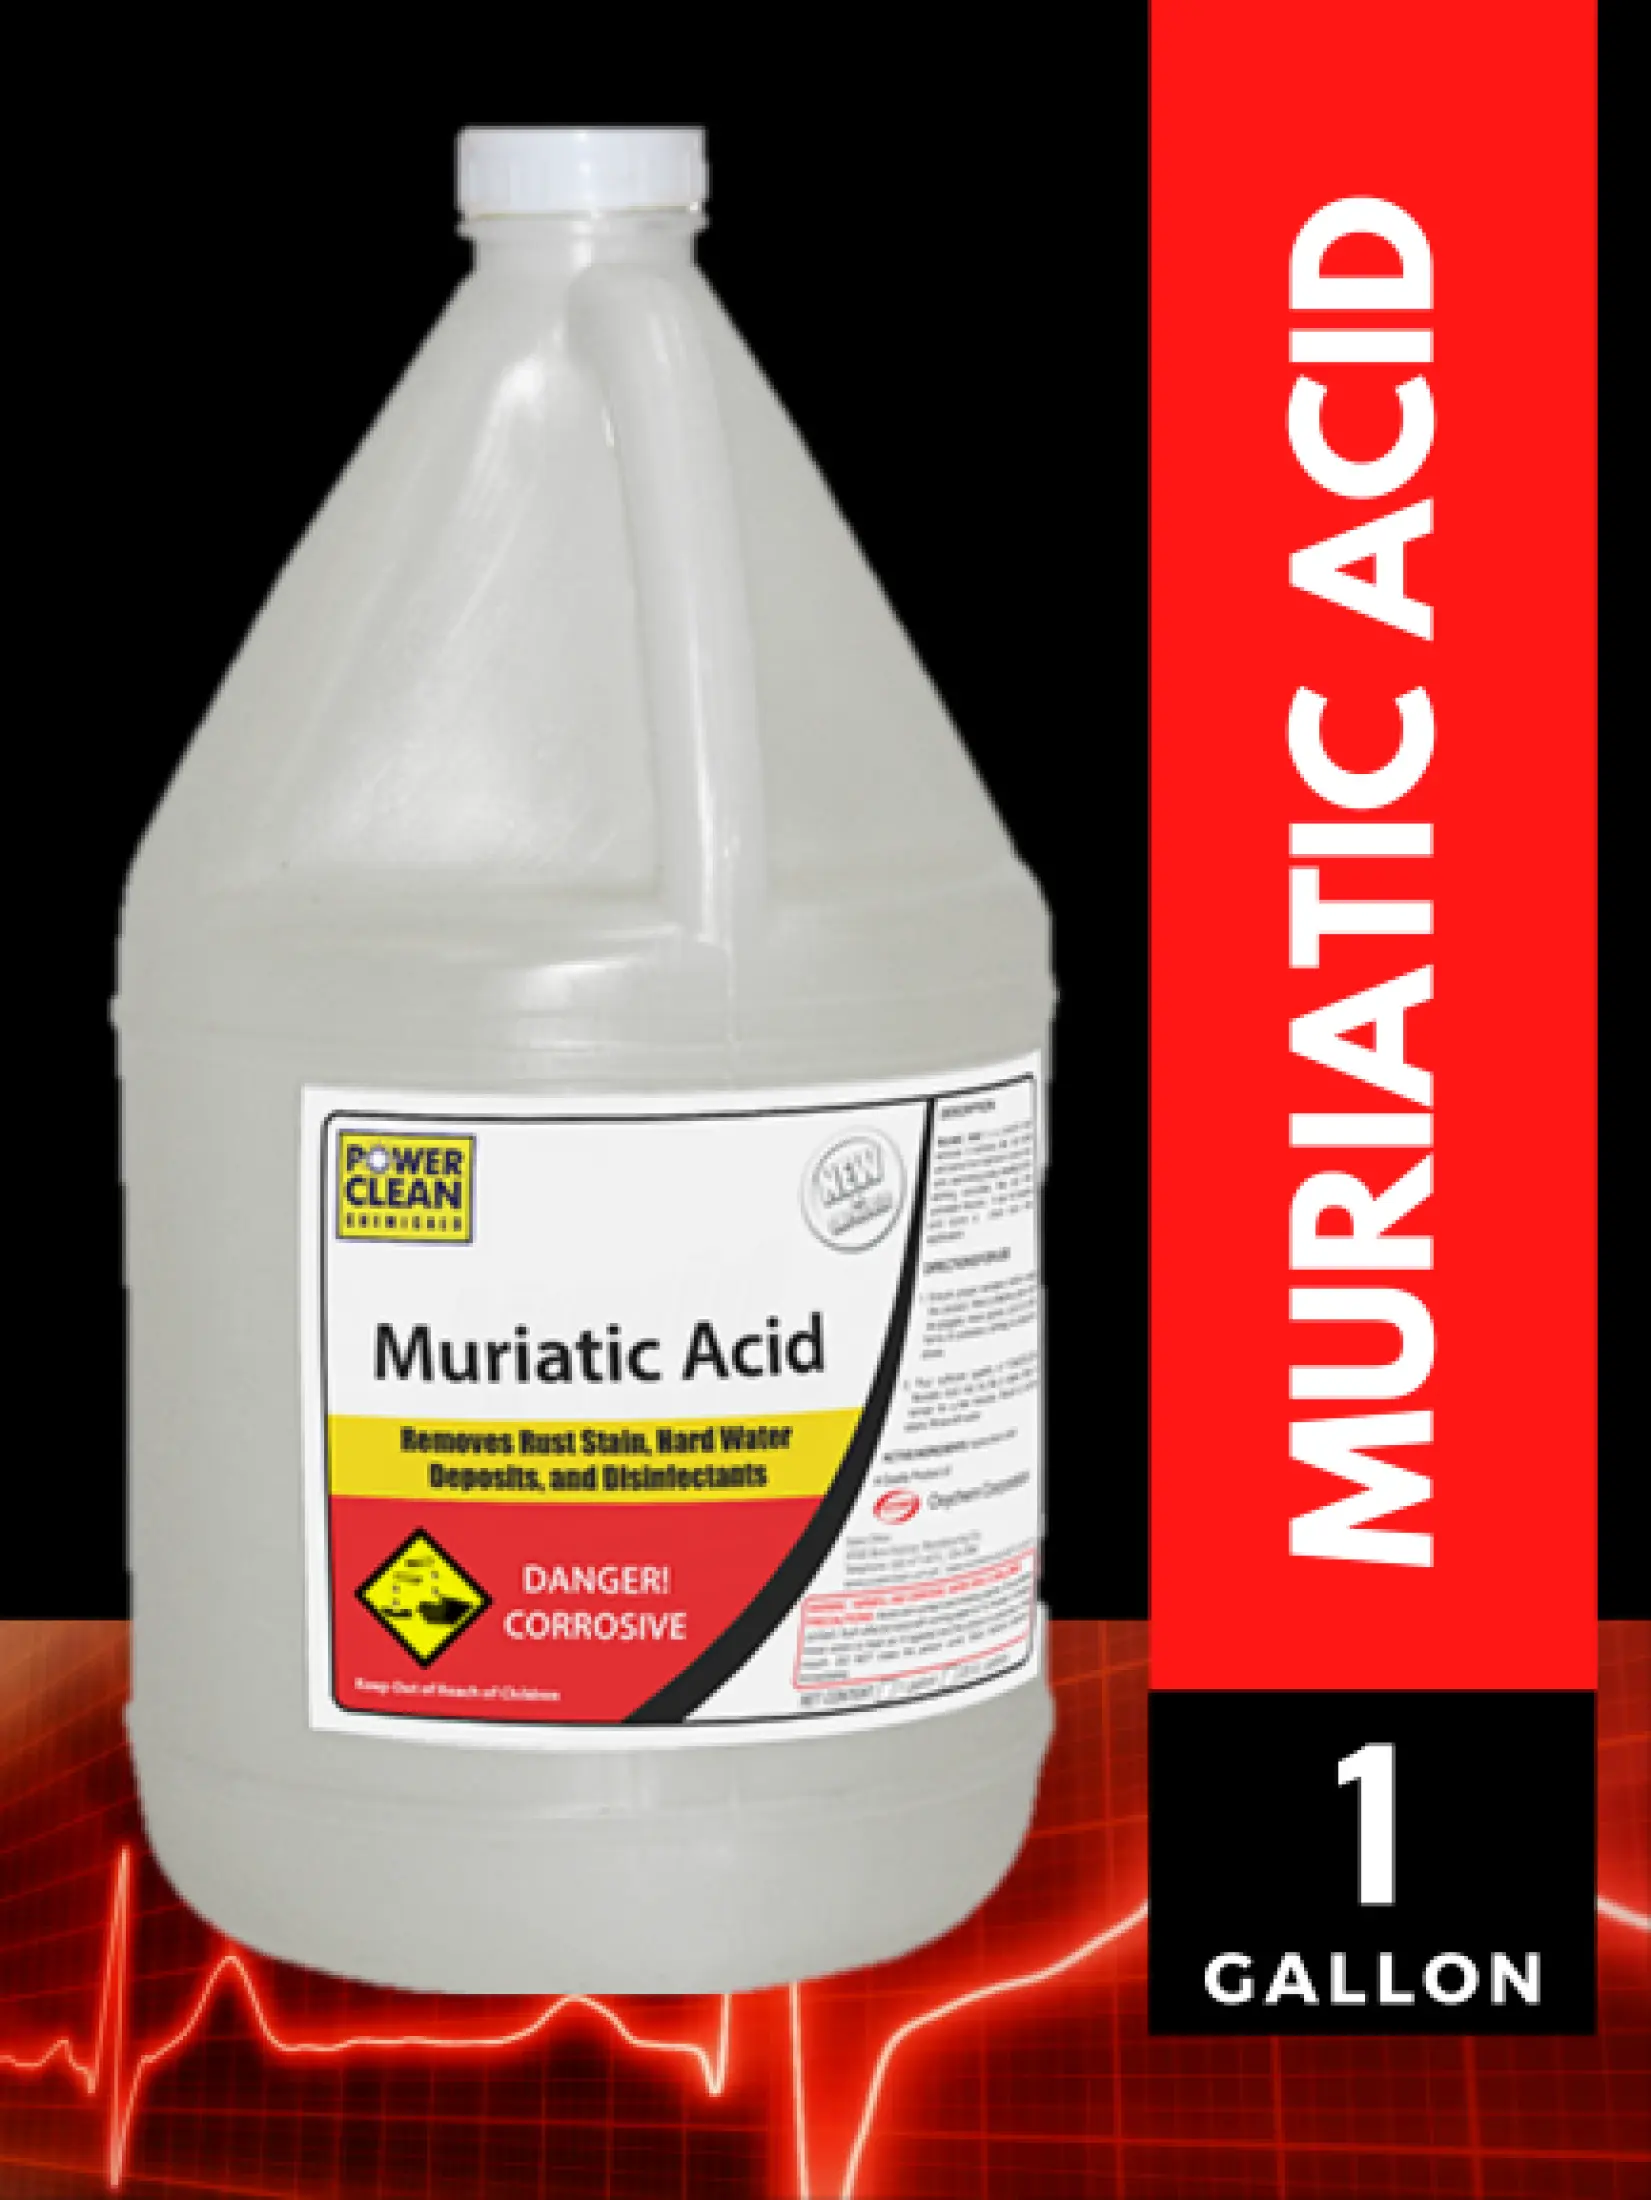 Heavy Duty Muriatic Acid, How To Clean Pool Tiles With Hydrochloric Acid